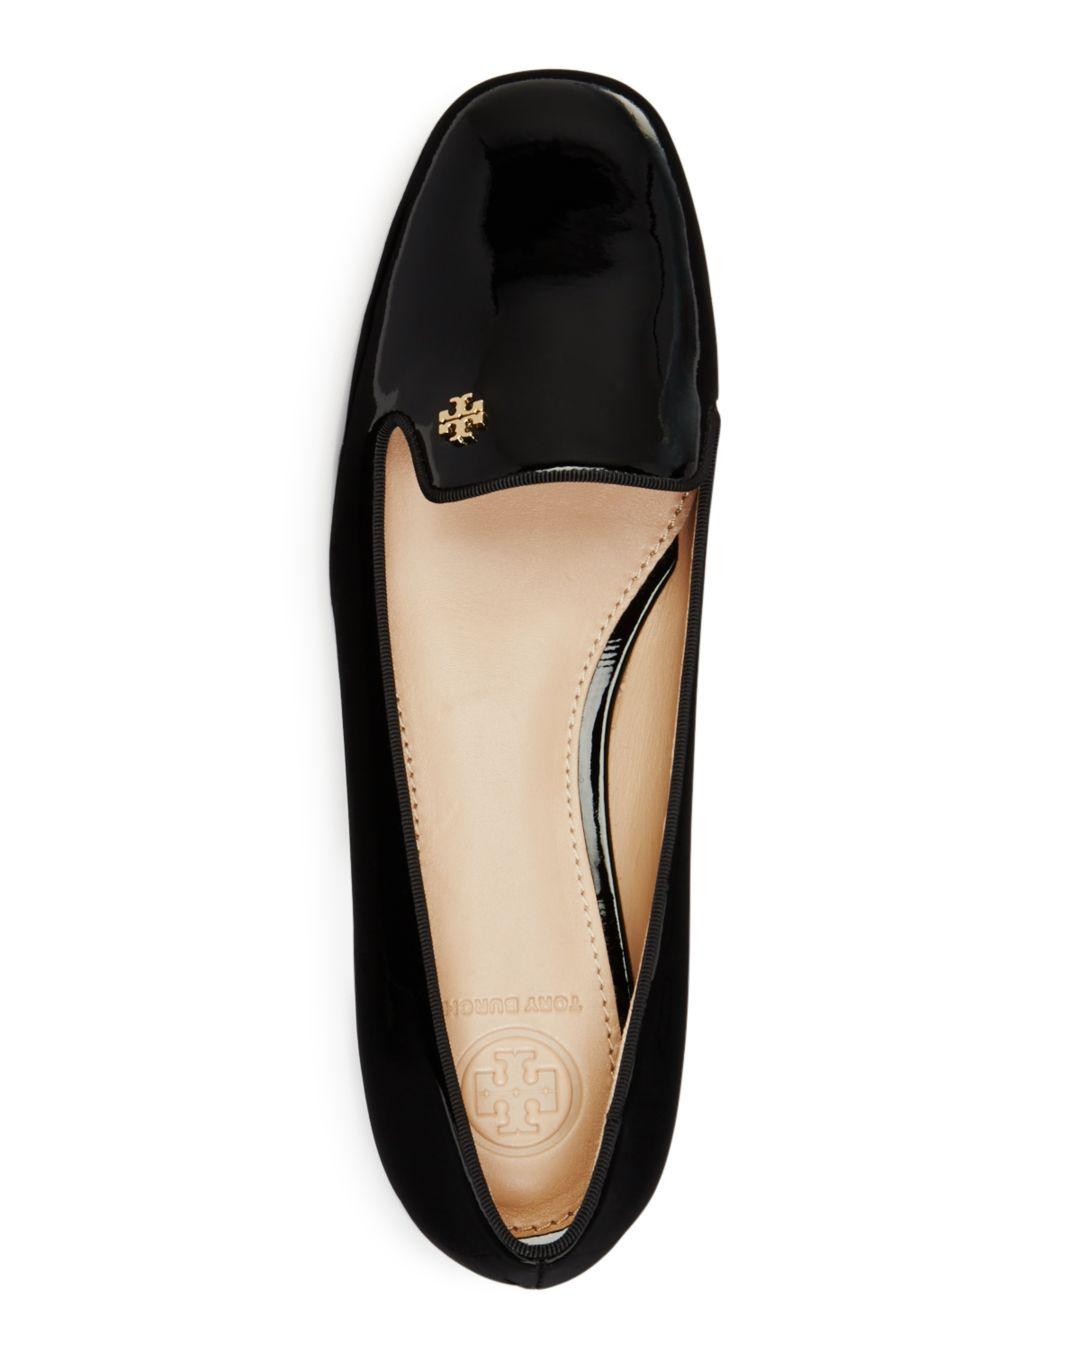 Tory Burch Samantha Patent Leather Loafers in Natural - Lyst